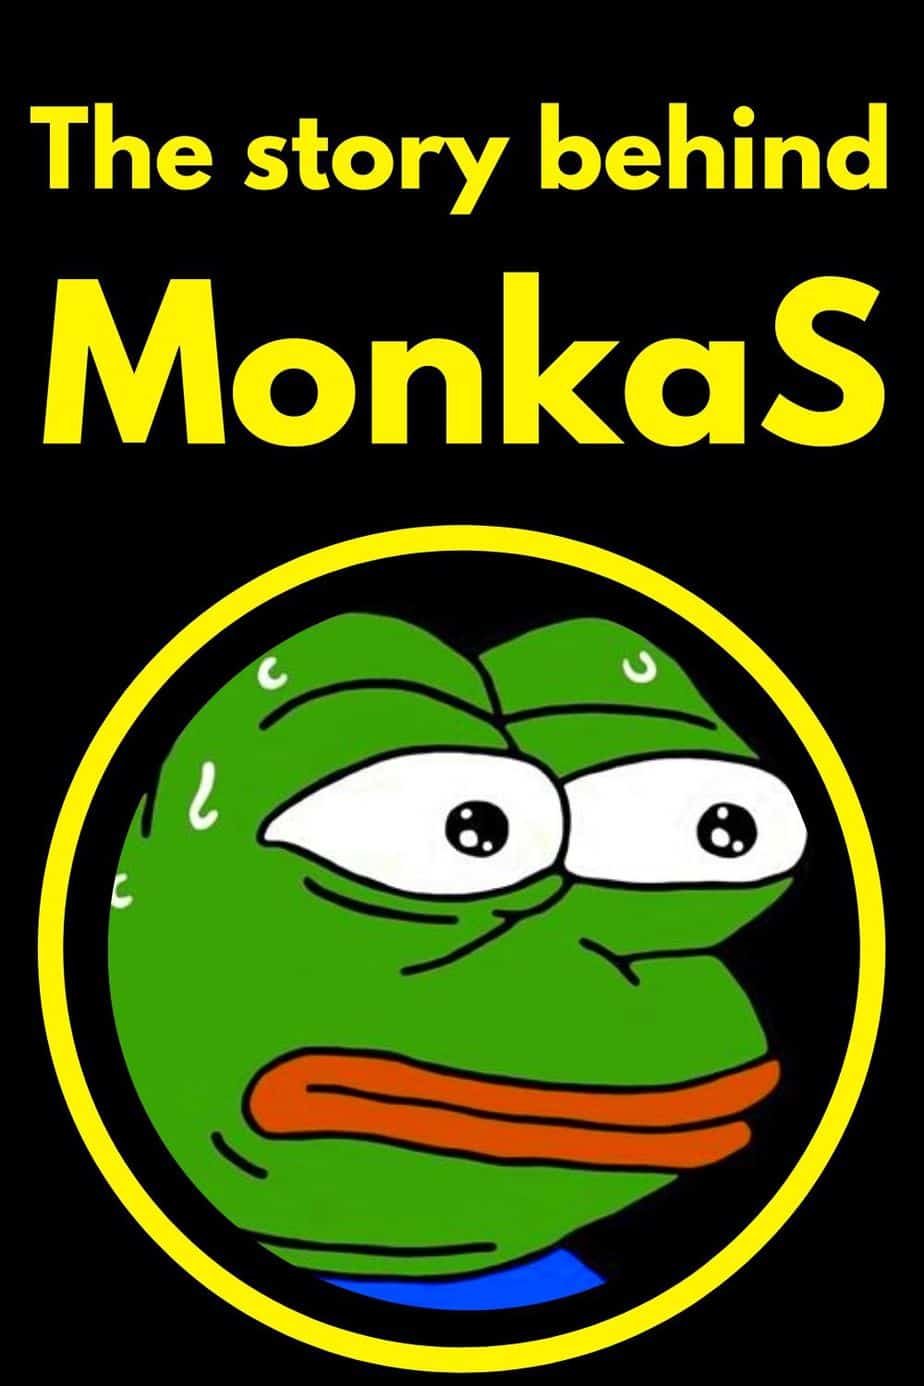 What does monkaS emote mean on Twitch